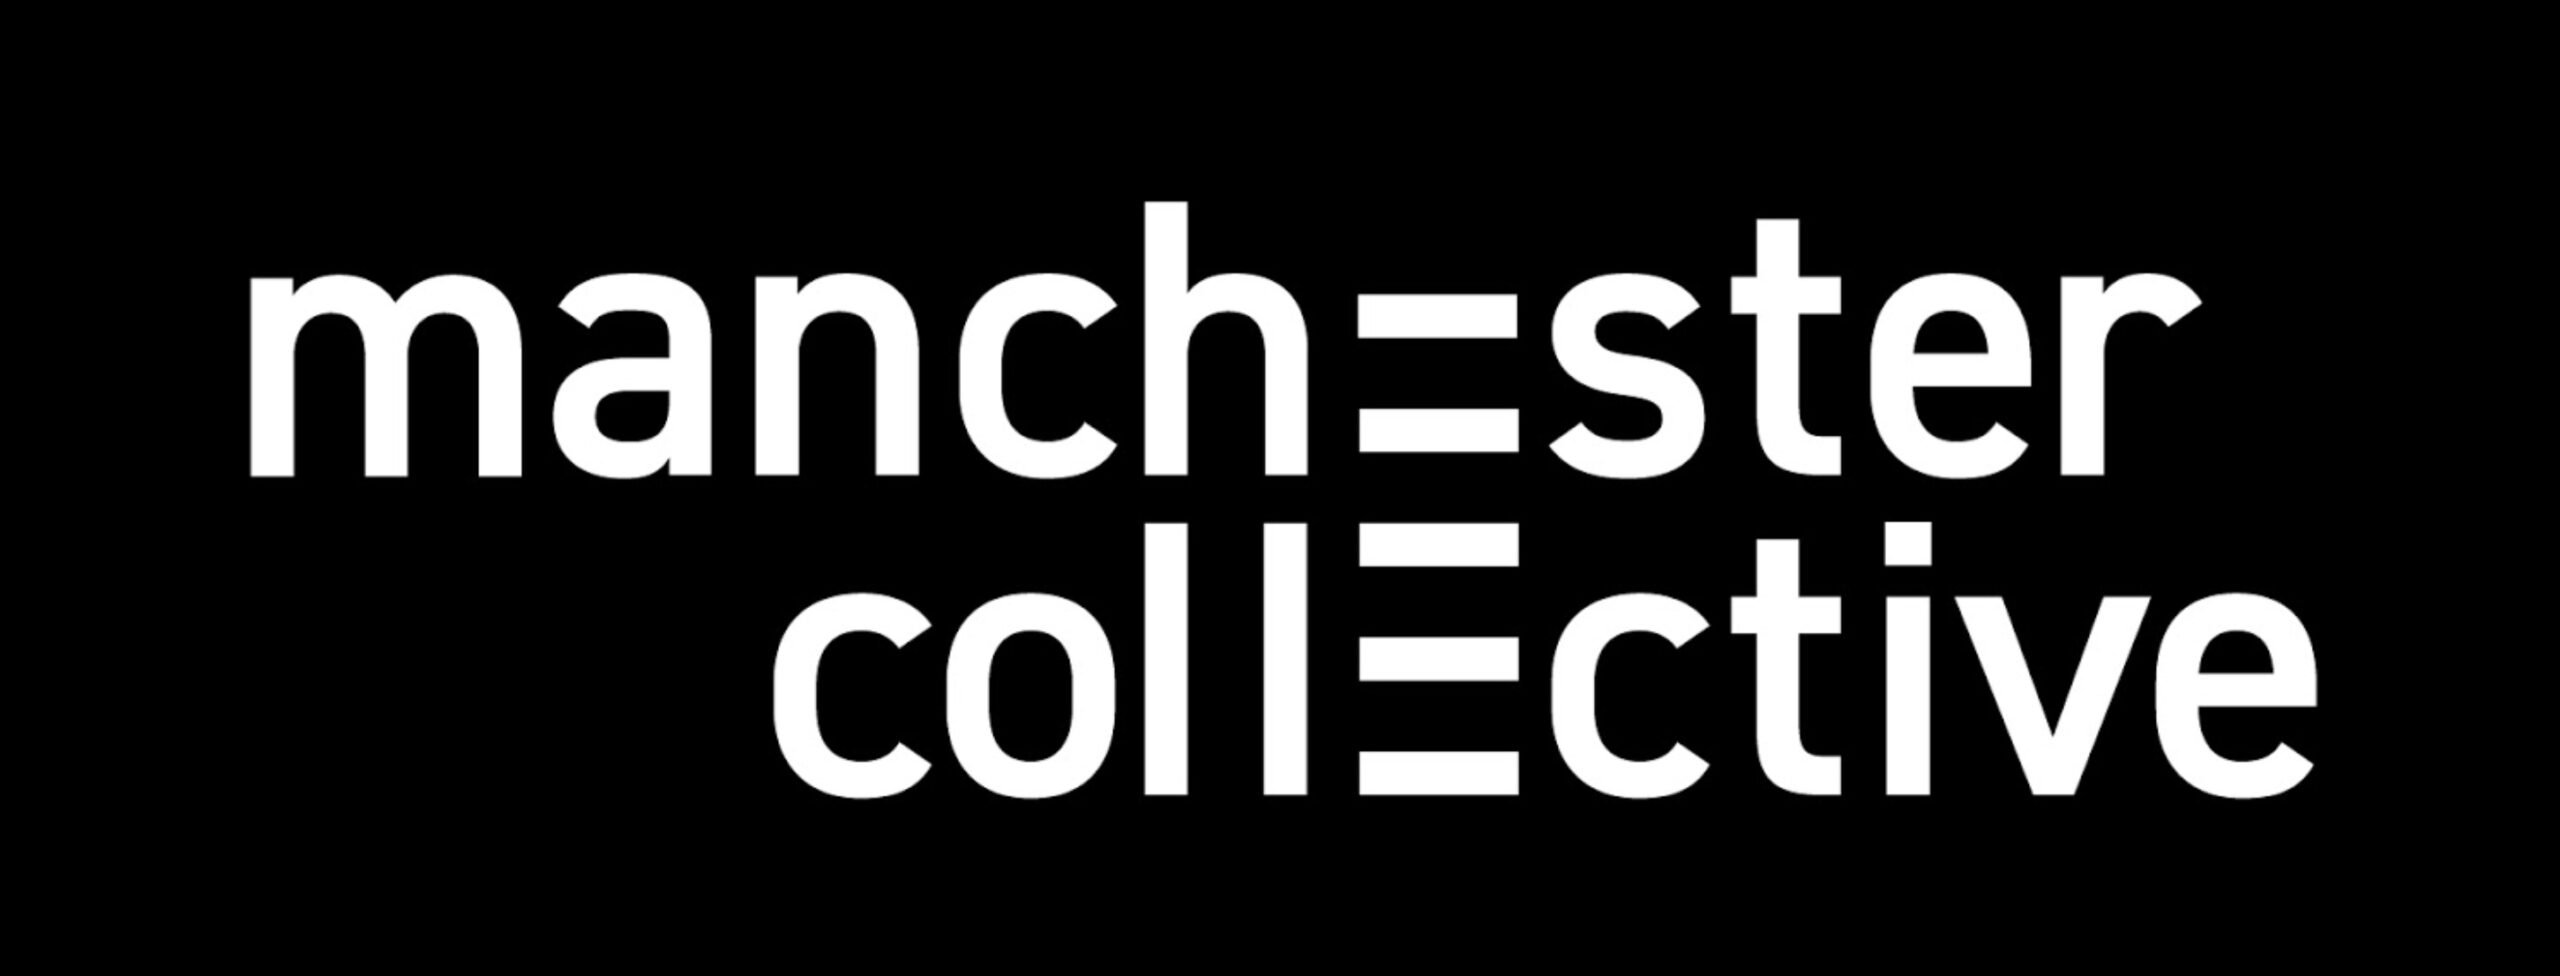 Manchecter Collective